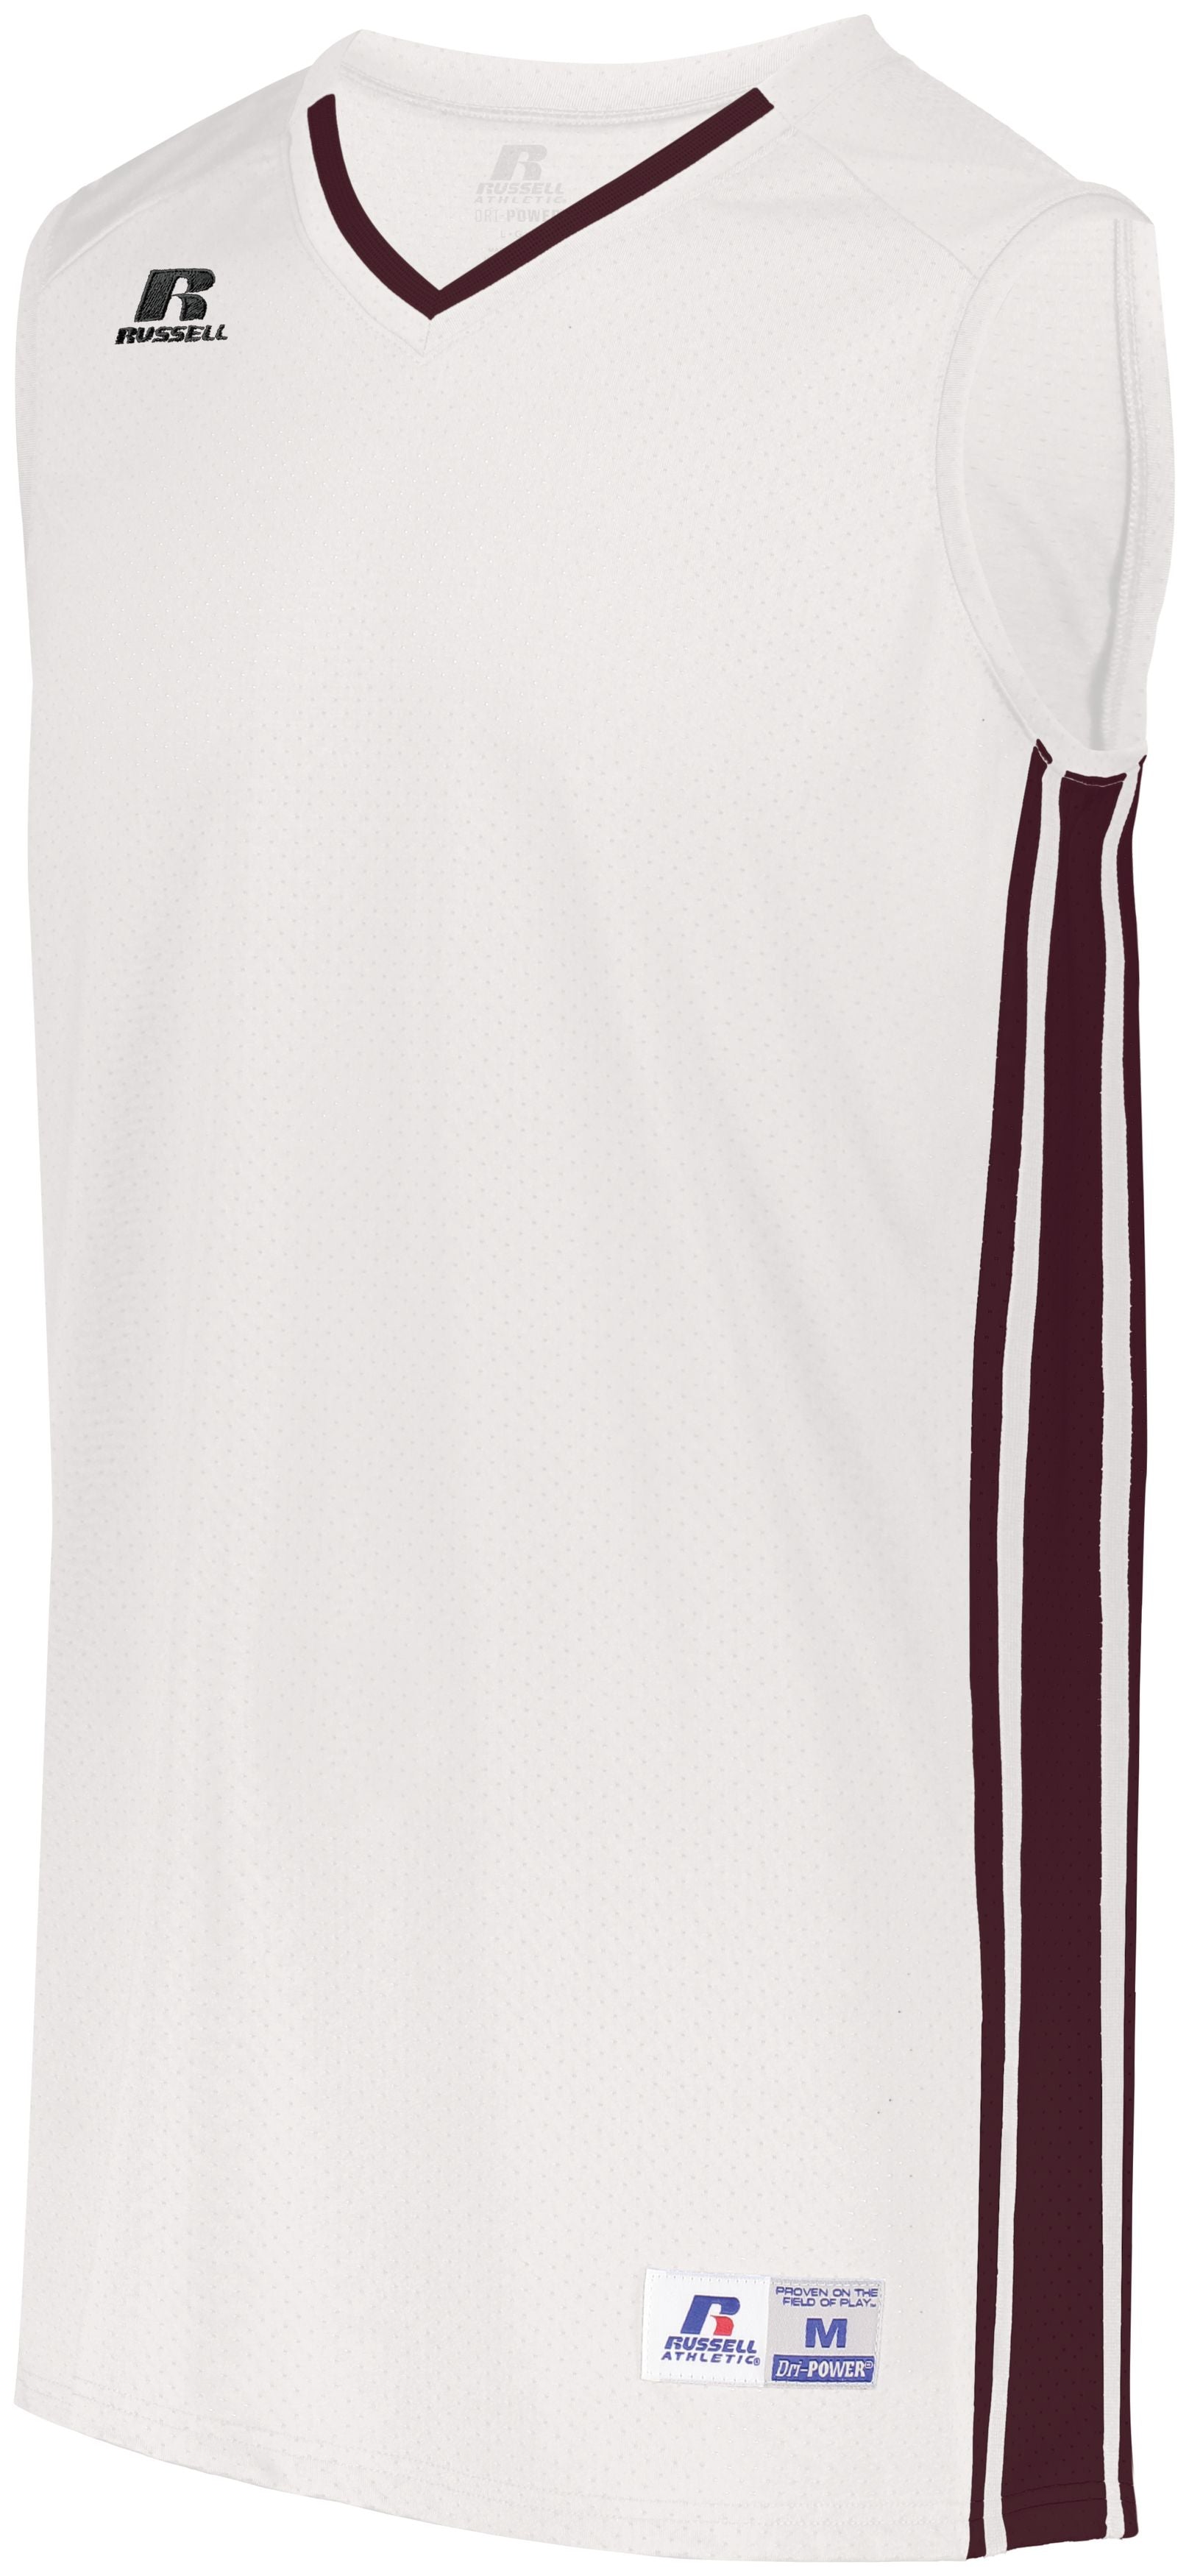 Russell Athletic Legacy Basketball Jersey in White/Maroon  -Part of the Adult, Adult-Jersey, Basketball, Russell-Athletic-Products, Shirts, All-Sports, All-Sports-1 product lines at KanaleyCreations.com